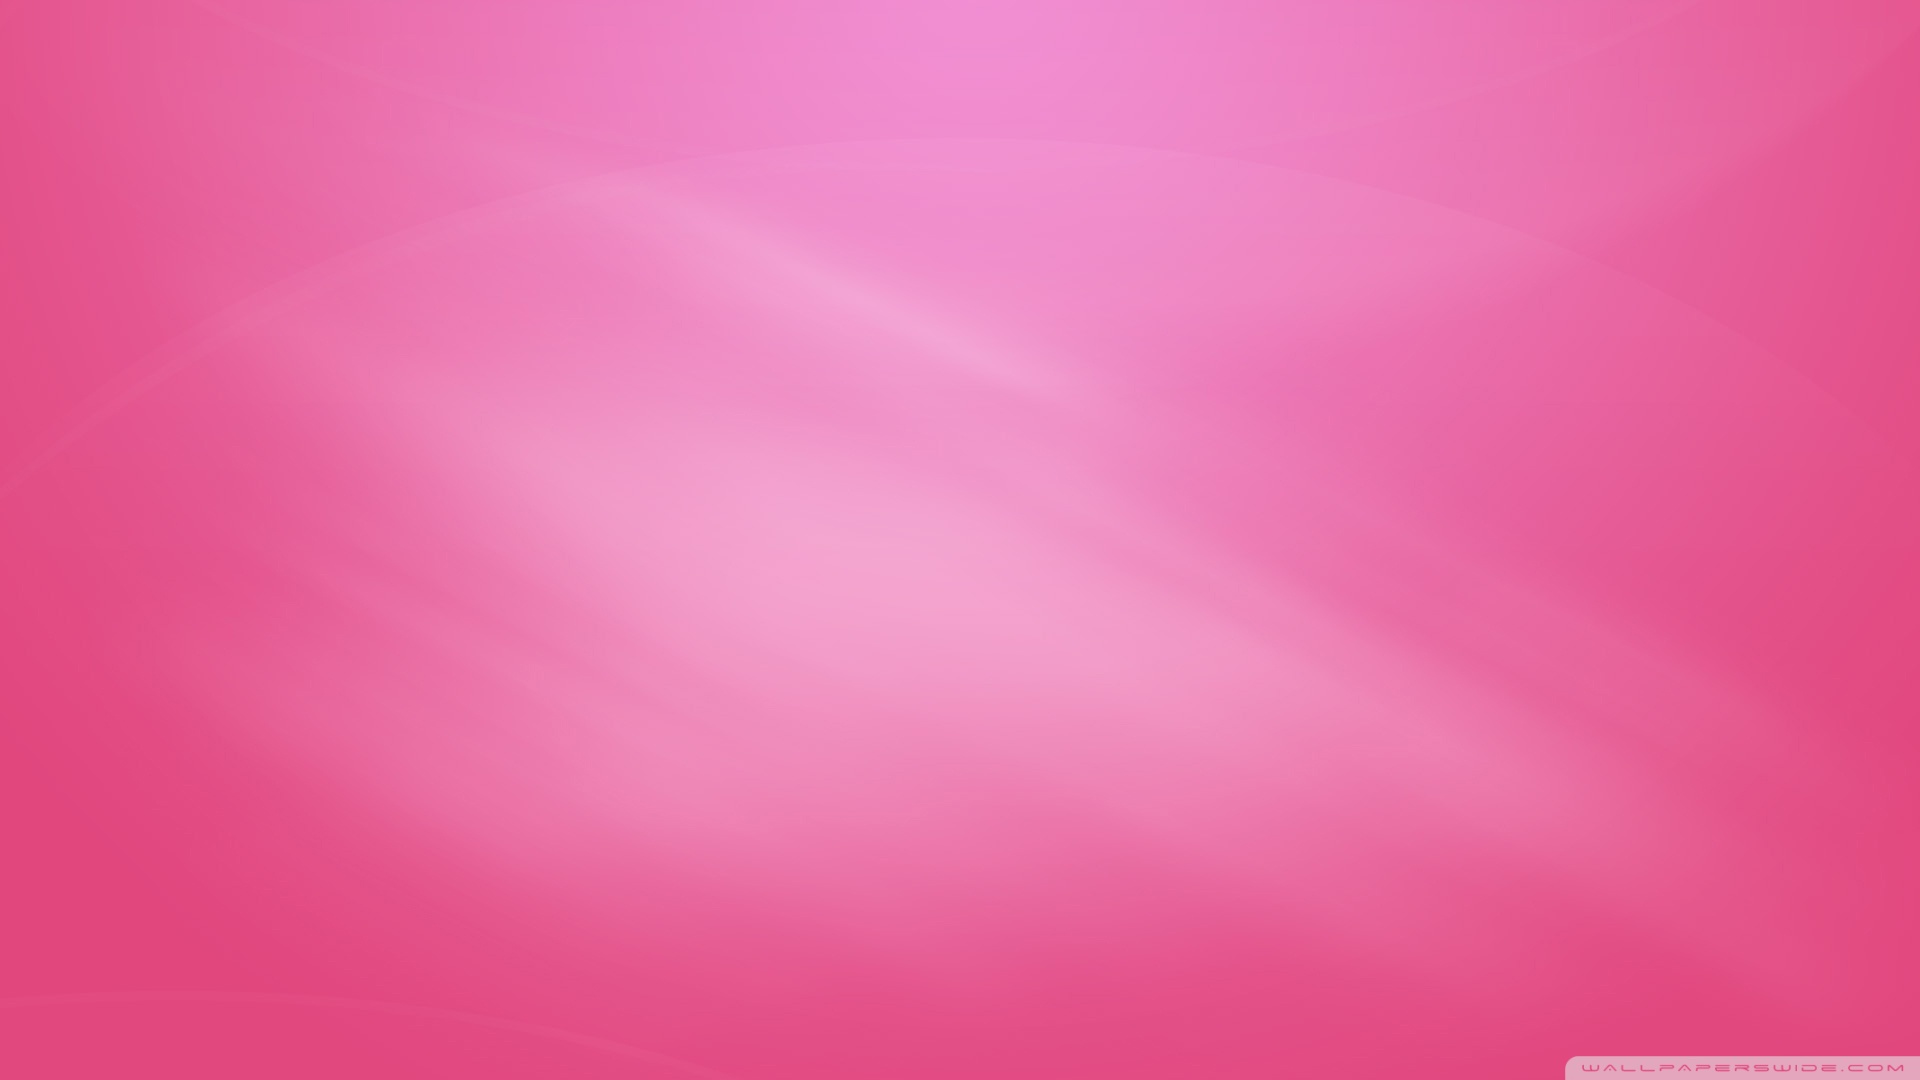 35 High Definition Pink Wallpapers Backgrounds For Free HD Wallpapers Download Free Images Wallpaper [wallpaper981.blogspot.com]